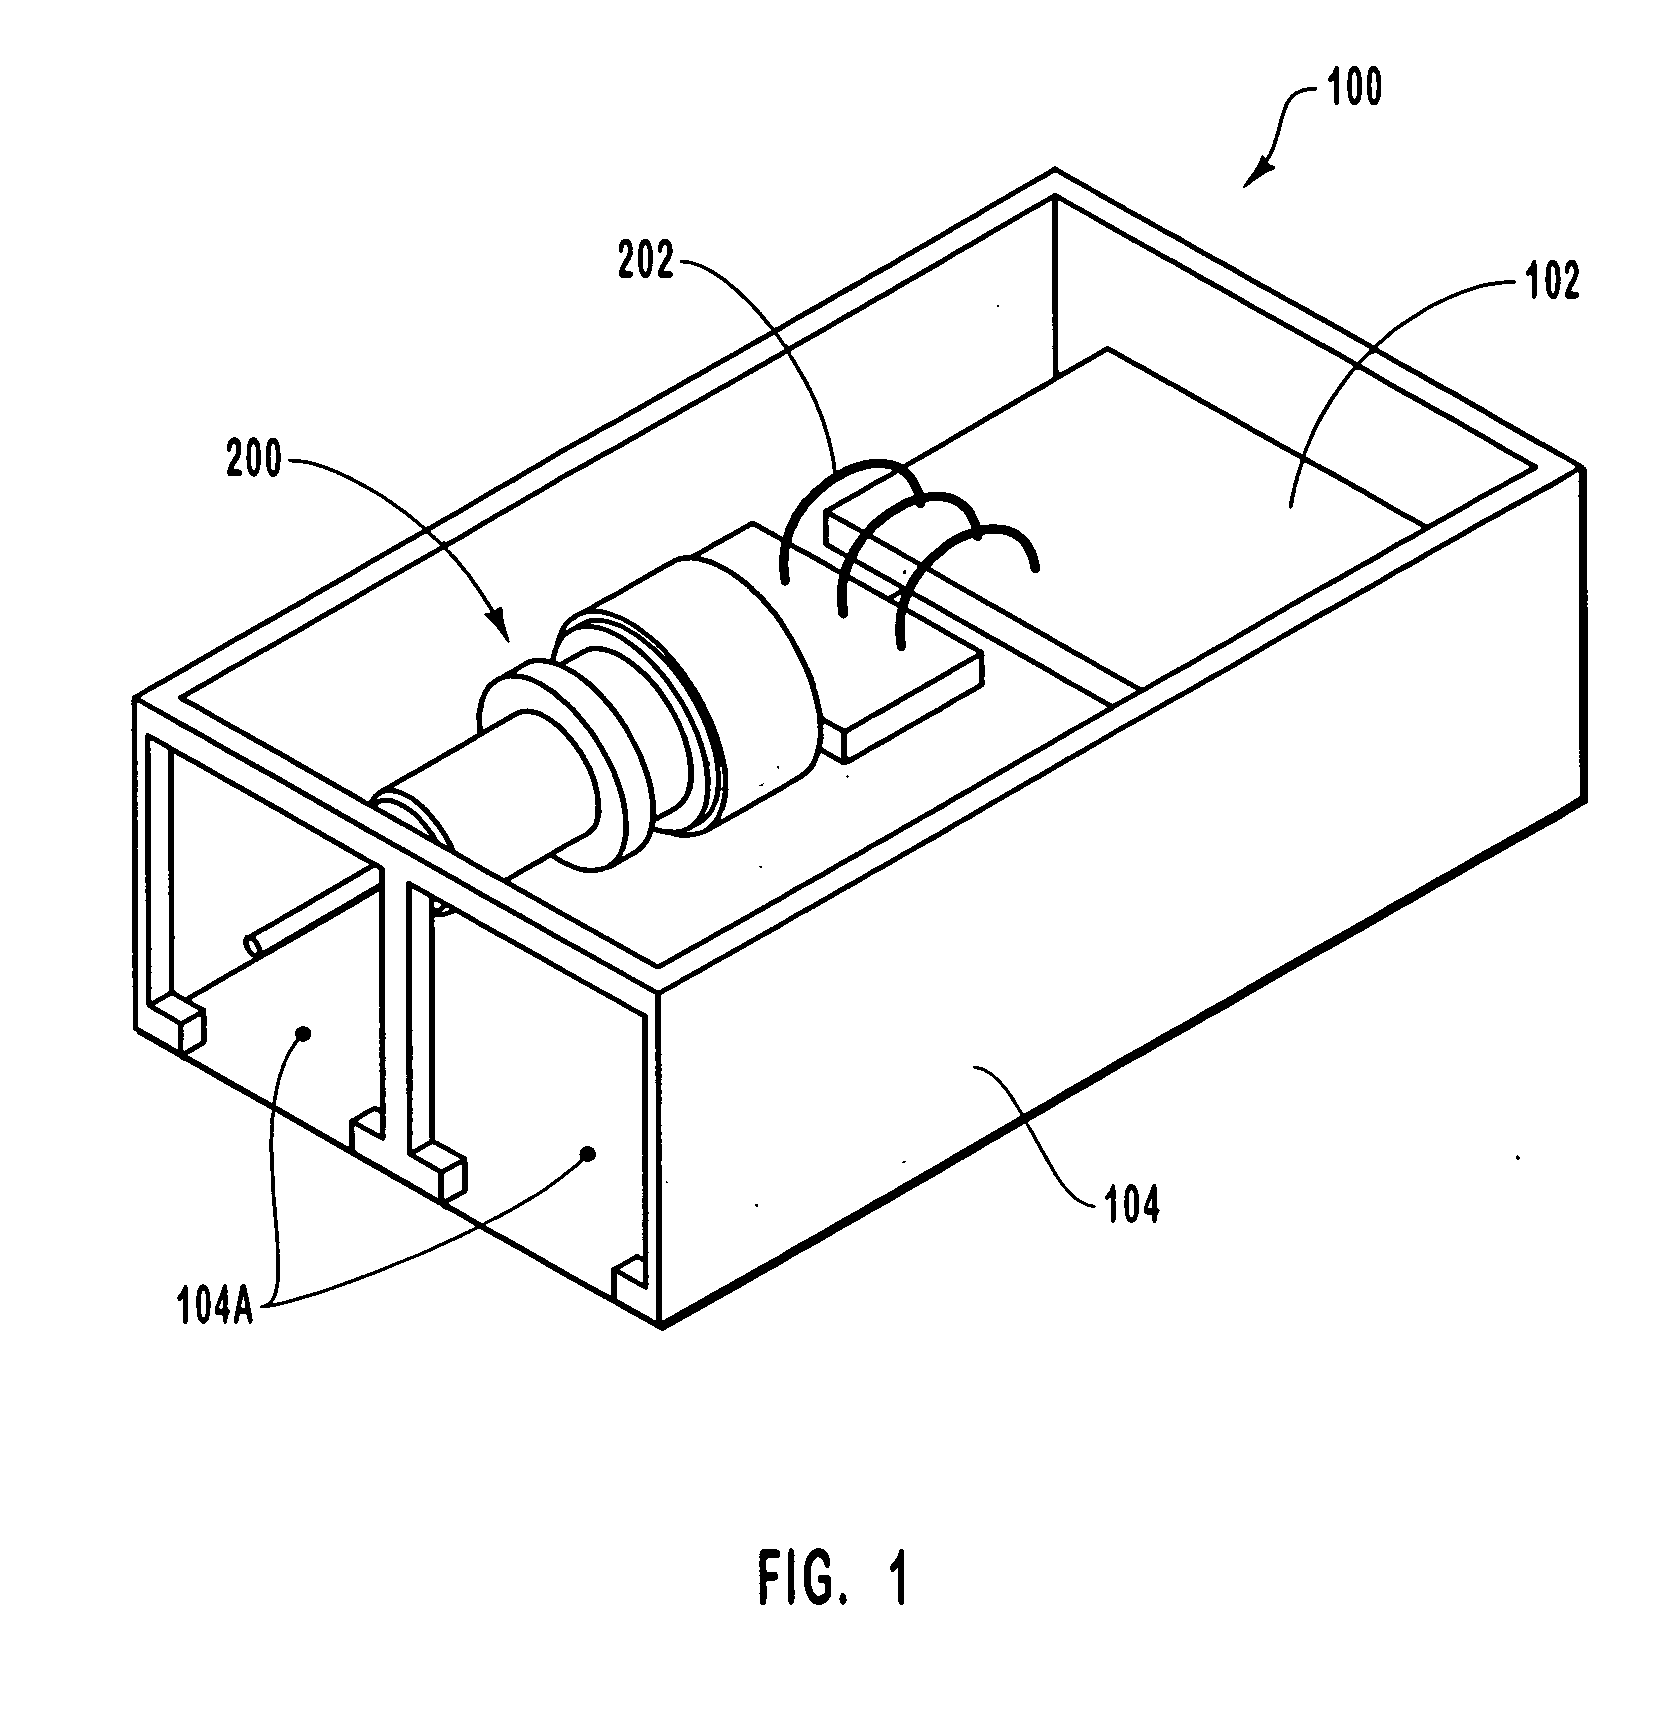 Integrated optical devices and methods of making same